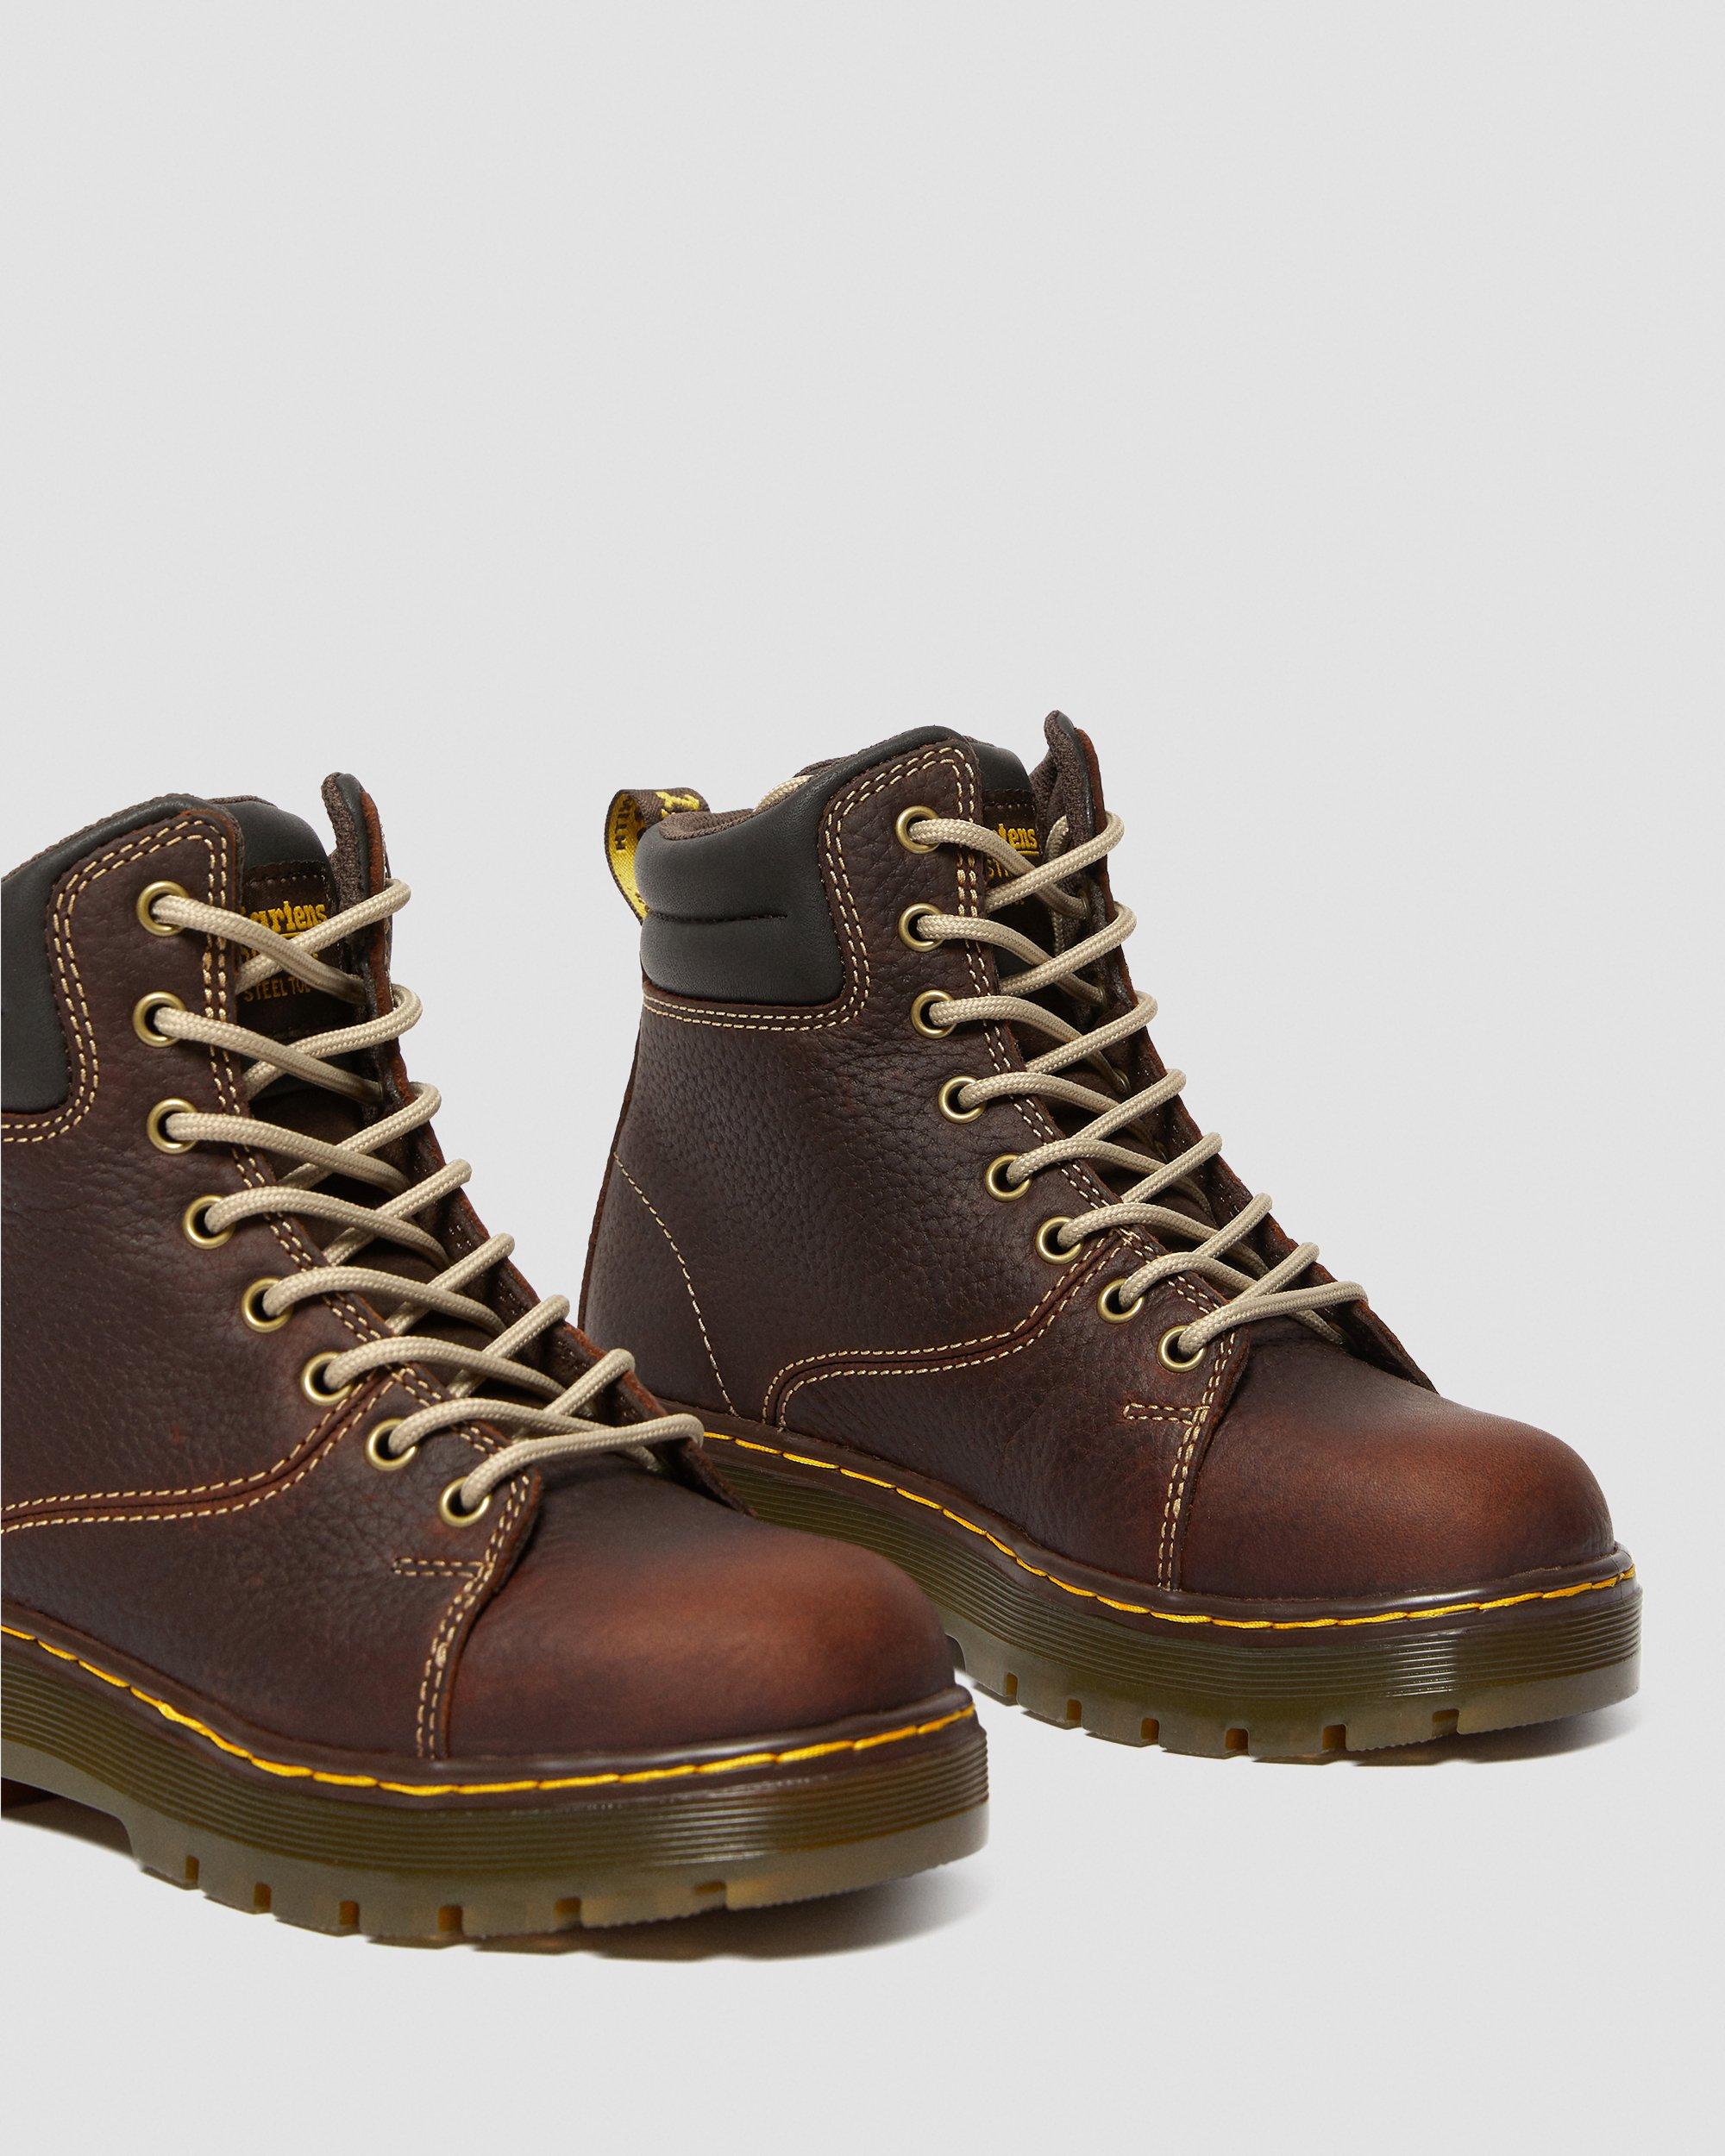 Gilbreth Women's Steel Toe Leather Work Boots | Dr. Martens